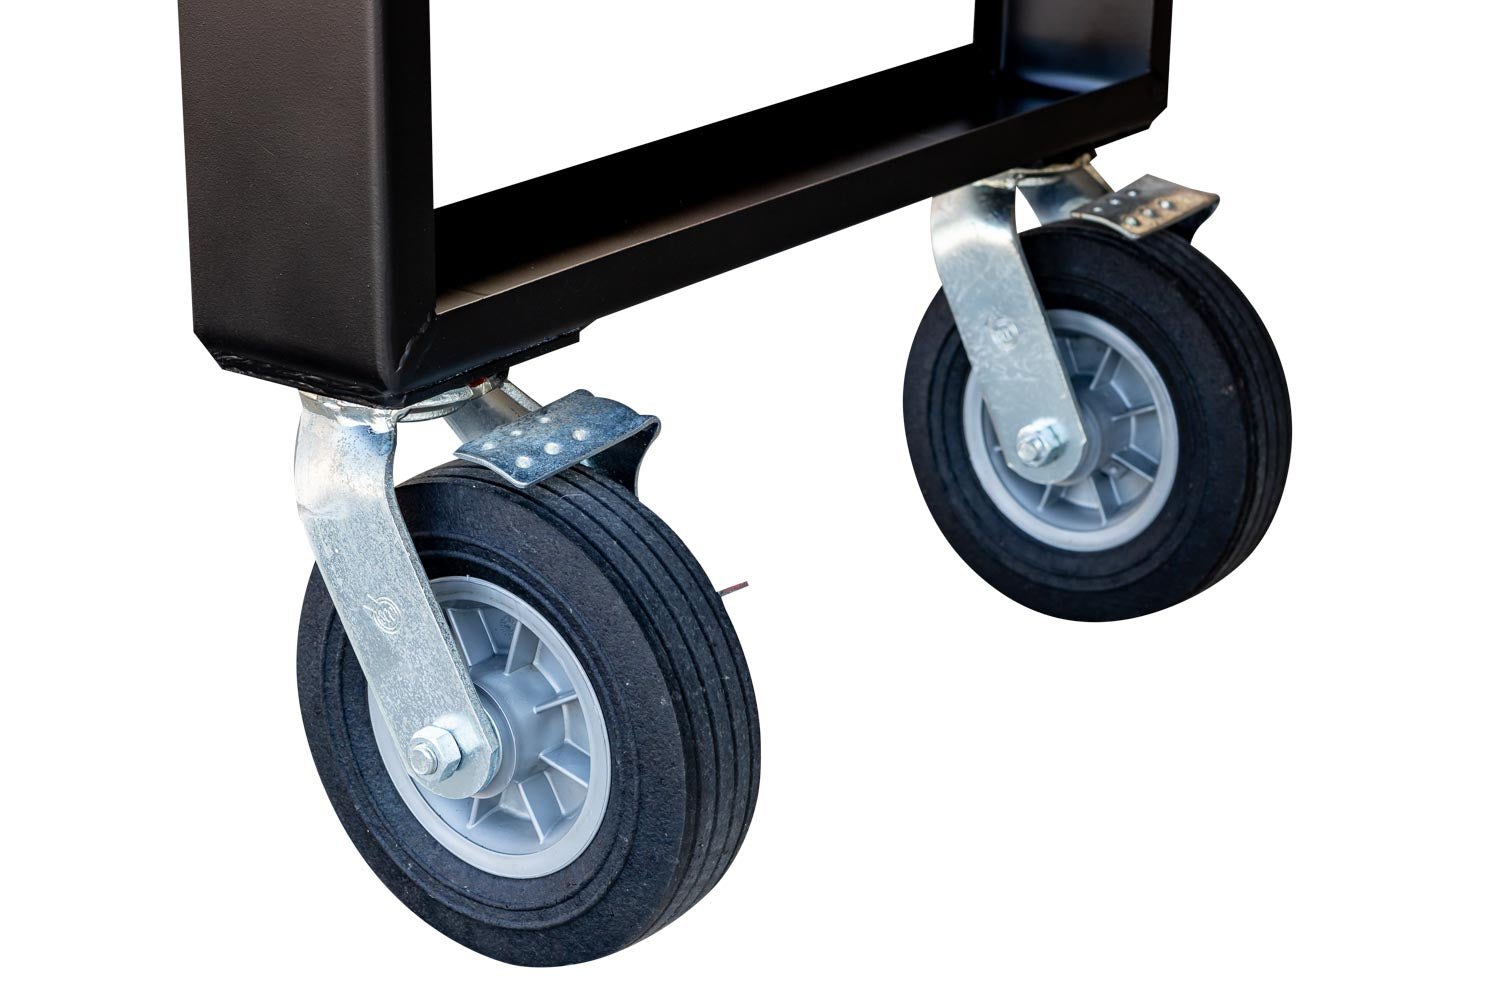 Close-up view of two 8-inch locking casters attached to the frame of a Meadow Creek smoker and cooker. The casters are heavy-duty with metal brackets and black rubber wheels.